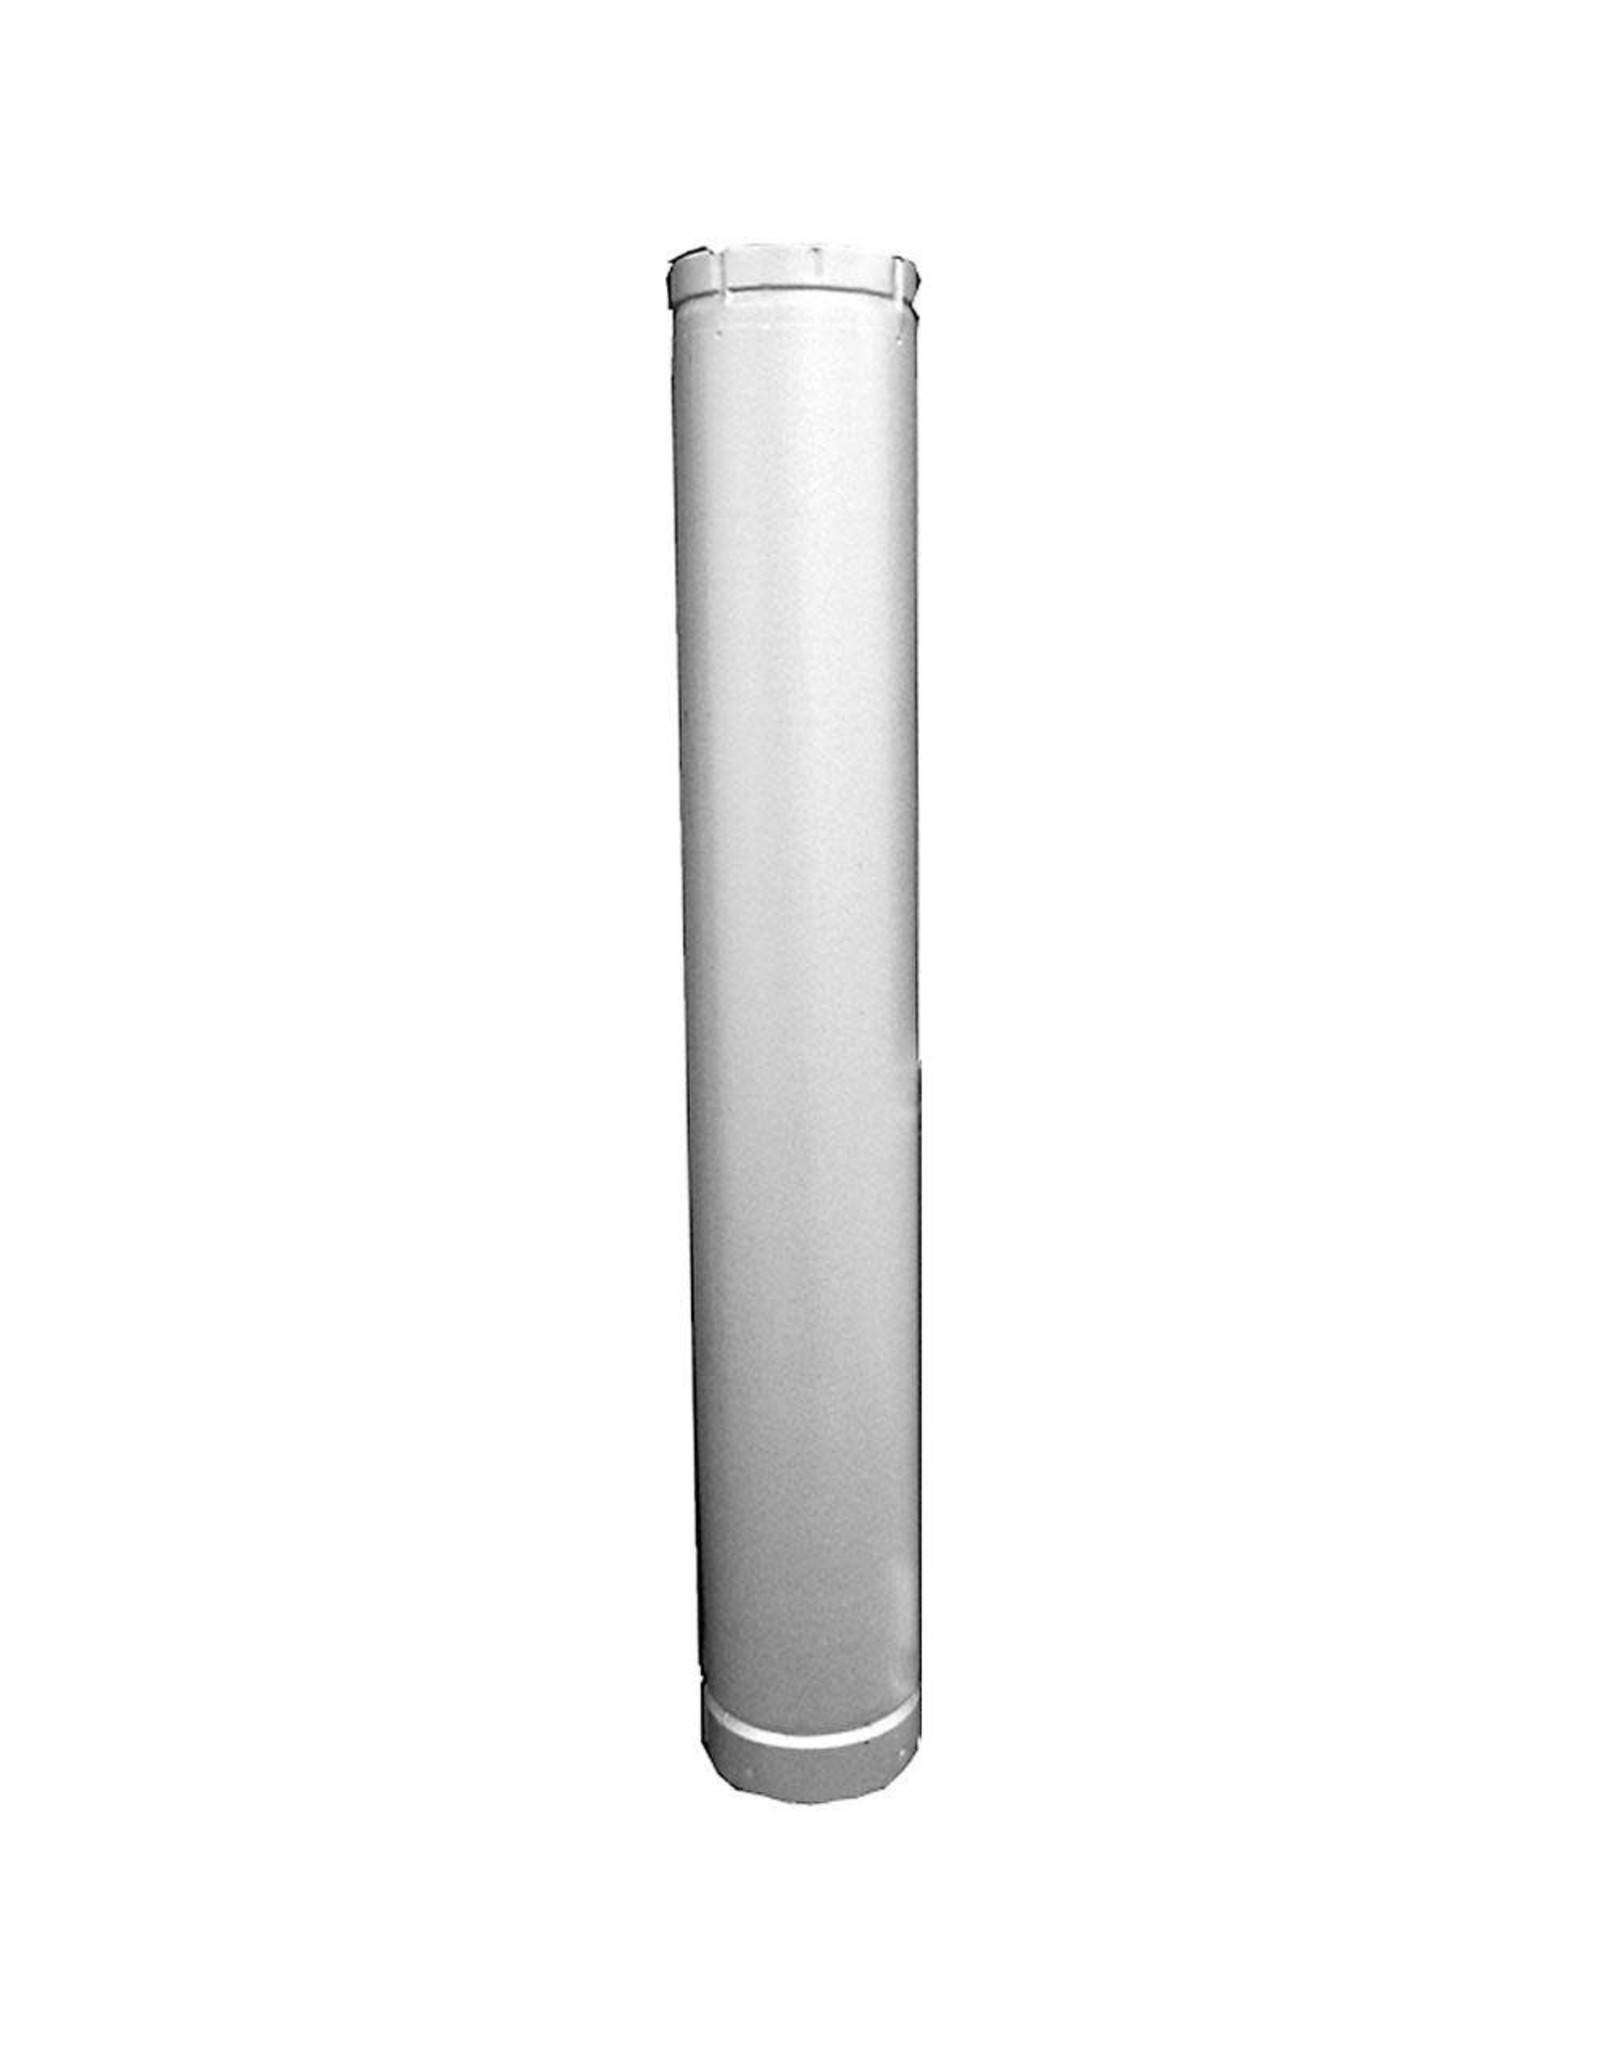 DOUBLE WALL VENT PIPE